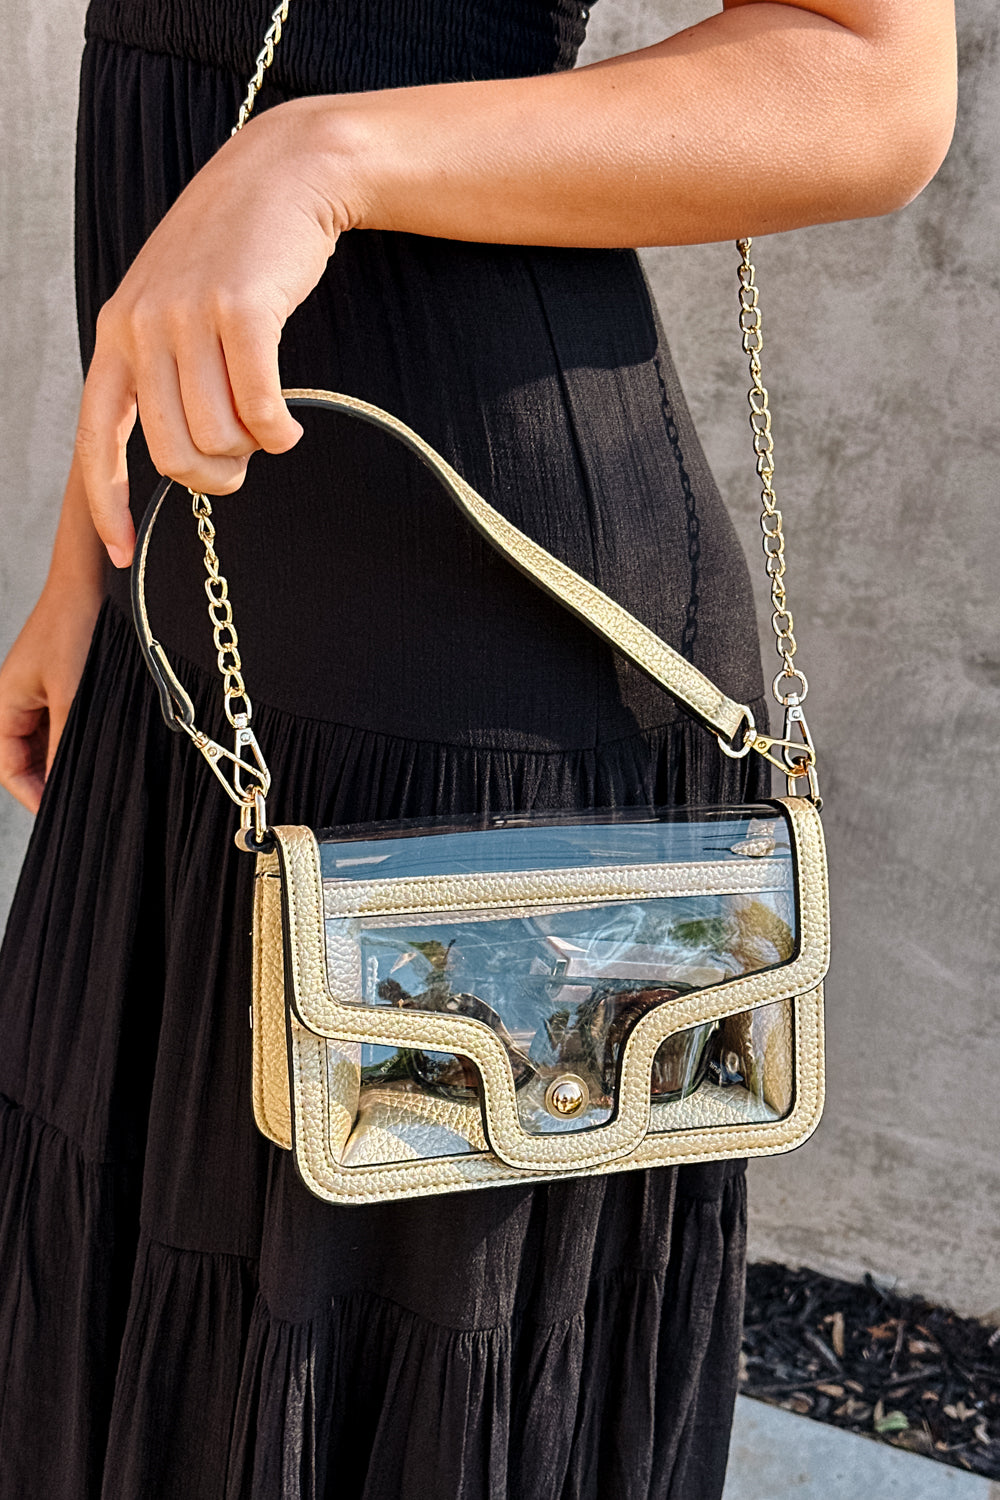 Close up side view of female model wearing the Miley Clear Purse in Gold which features clear with leather details, gold snap closure, and an adjustable gold chain strap with gold details.